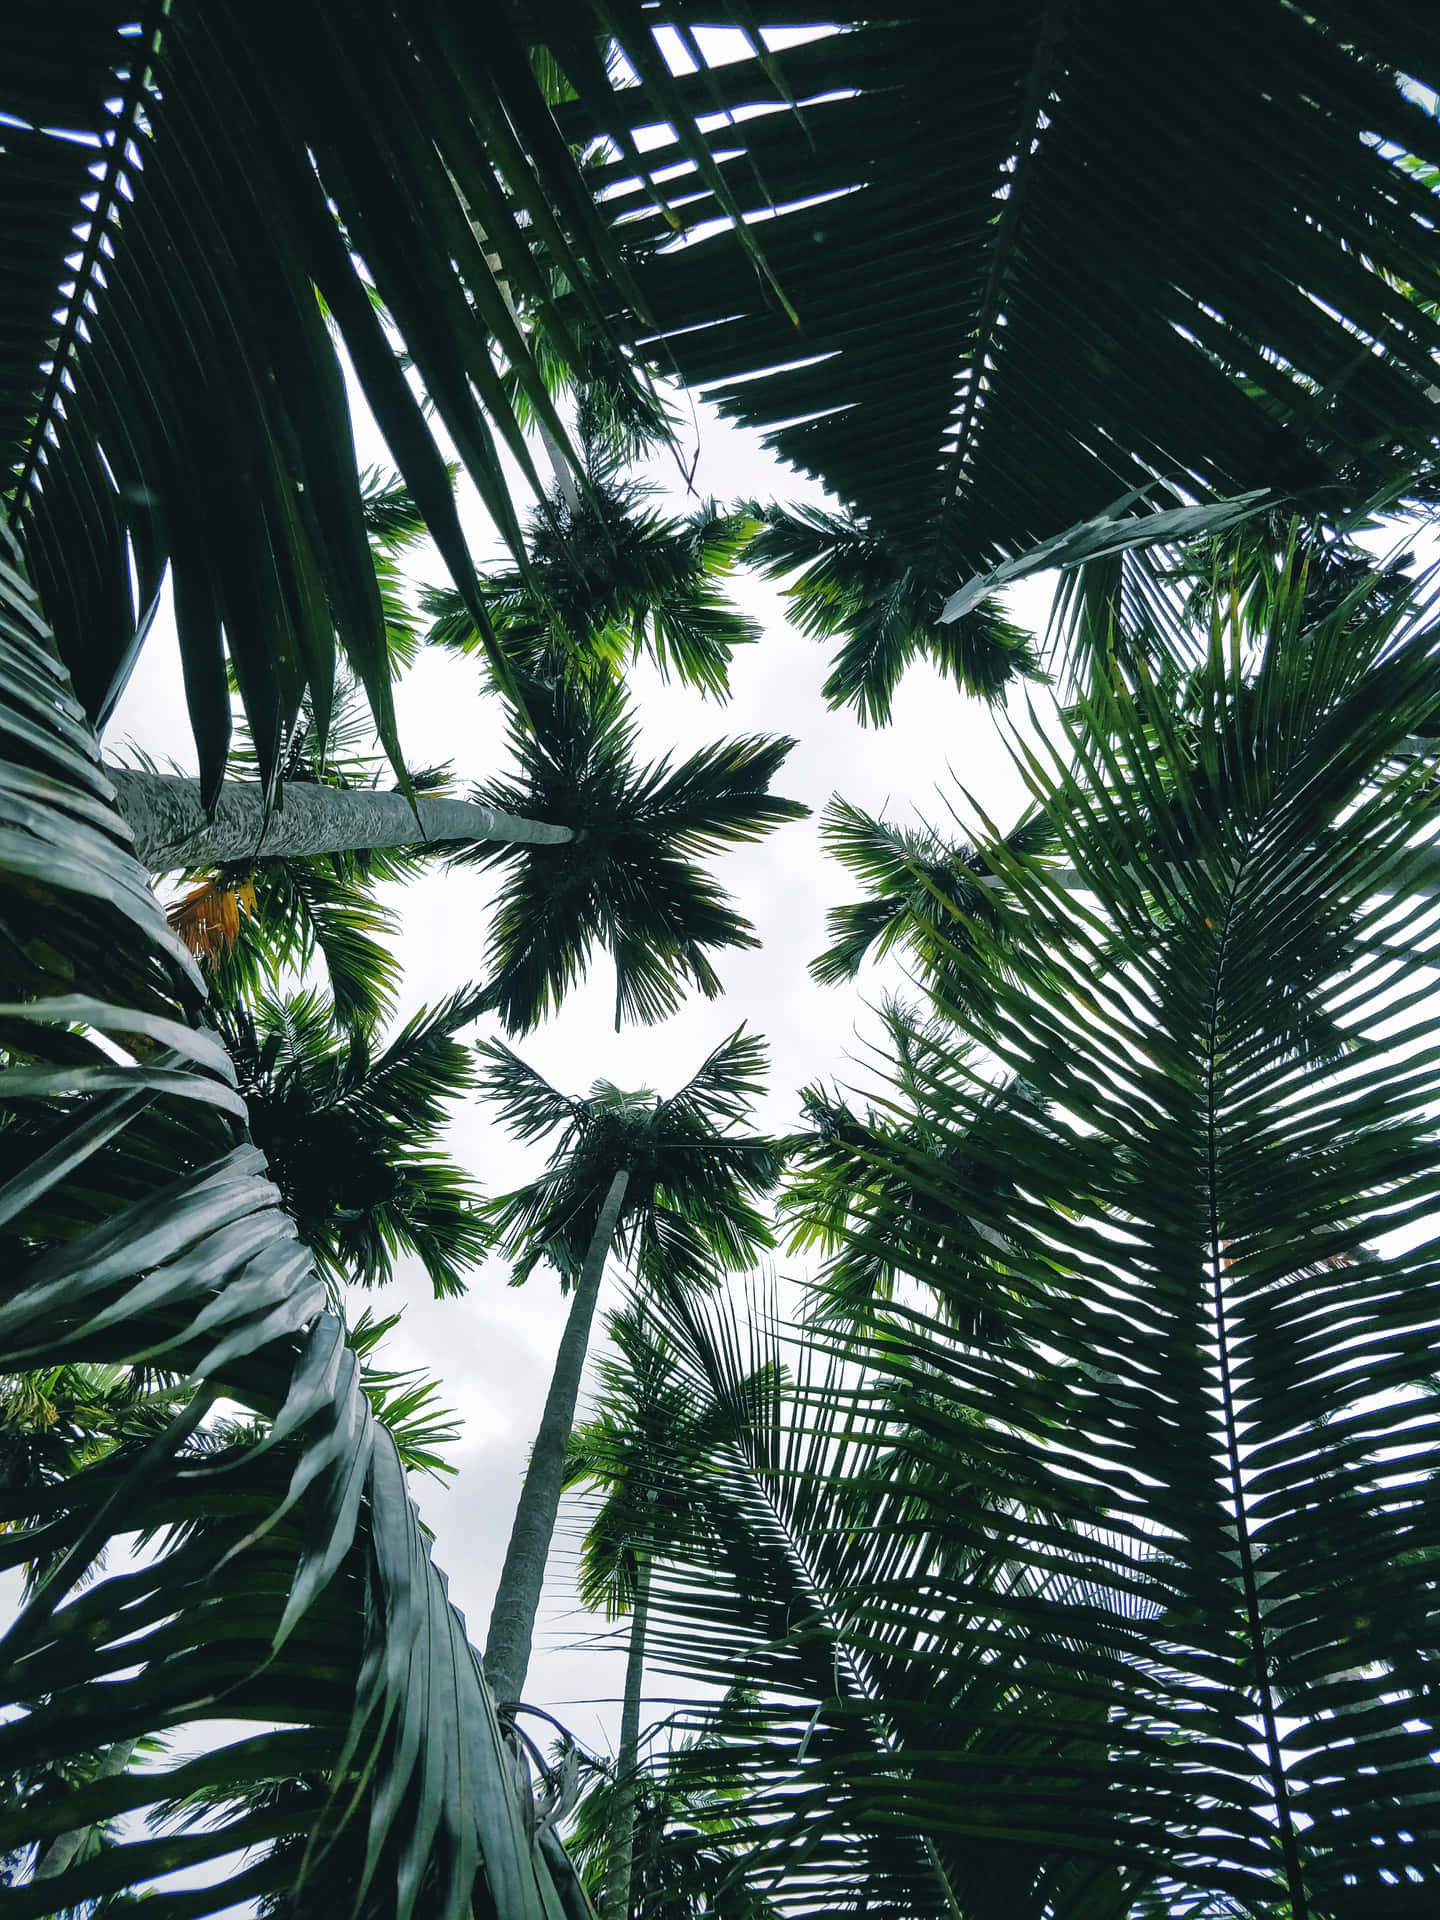 Aesthetic Palm Leaves In Jungle Wallpaper